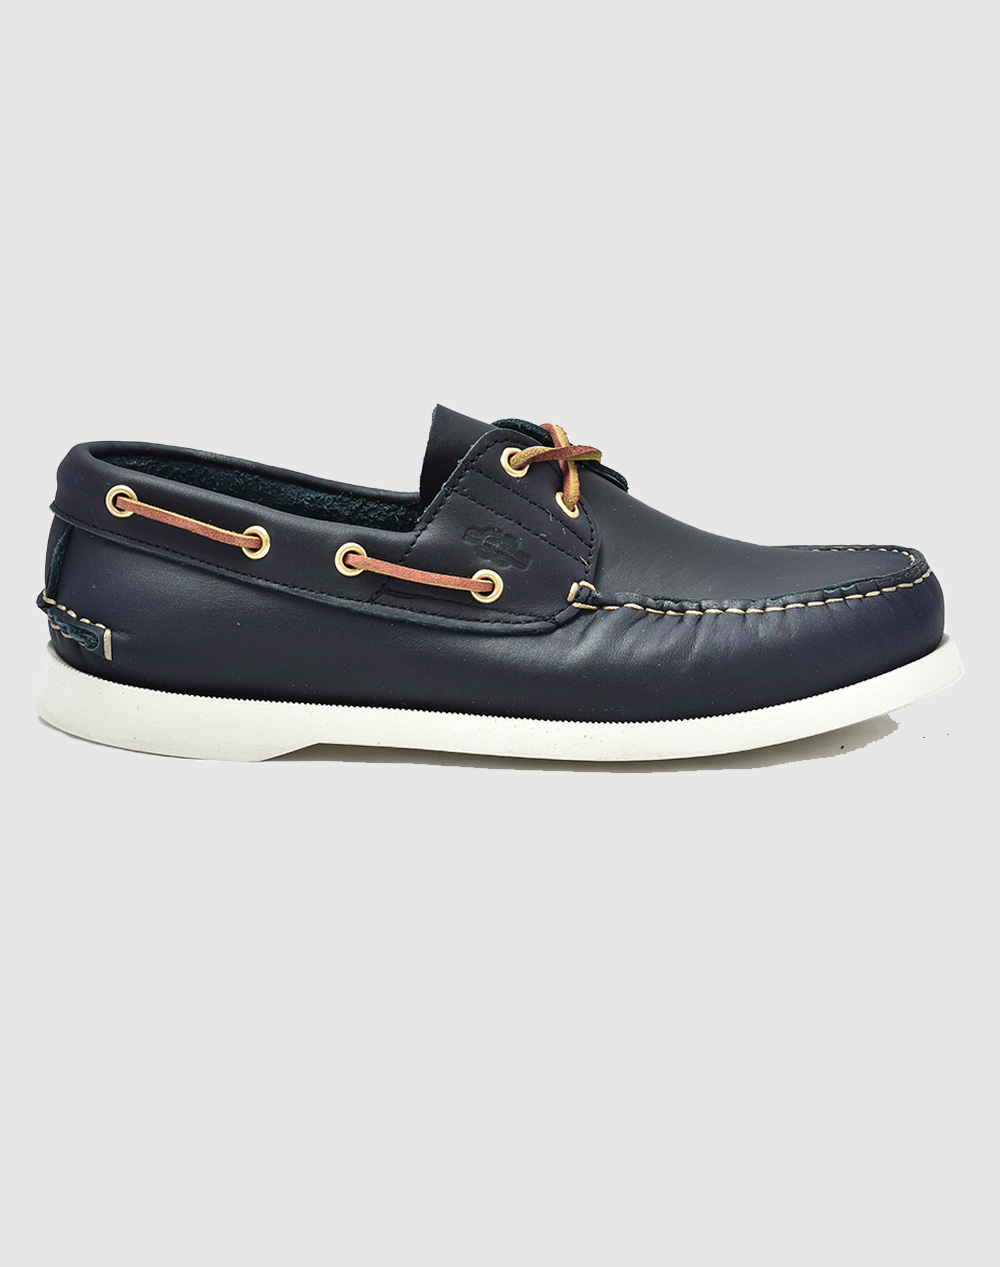 CHICAGO CHICAGO SHOES 124-5.0947-820-NAVY/W NavyBlue